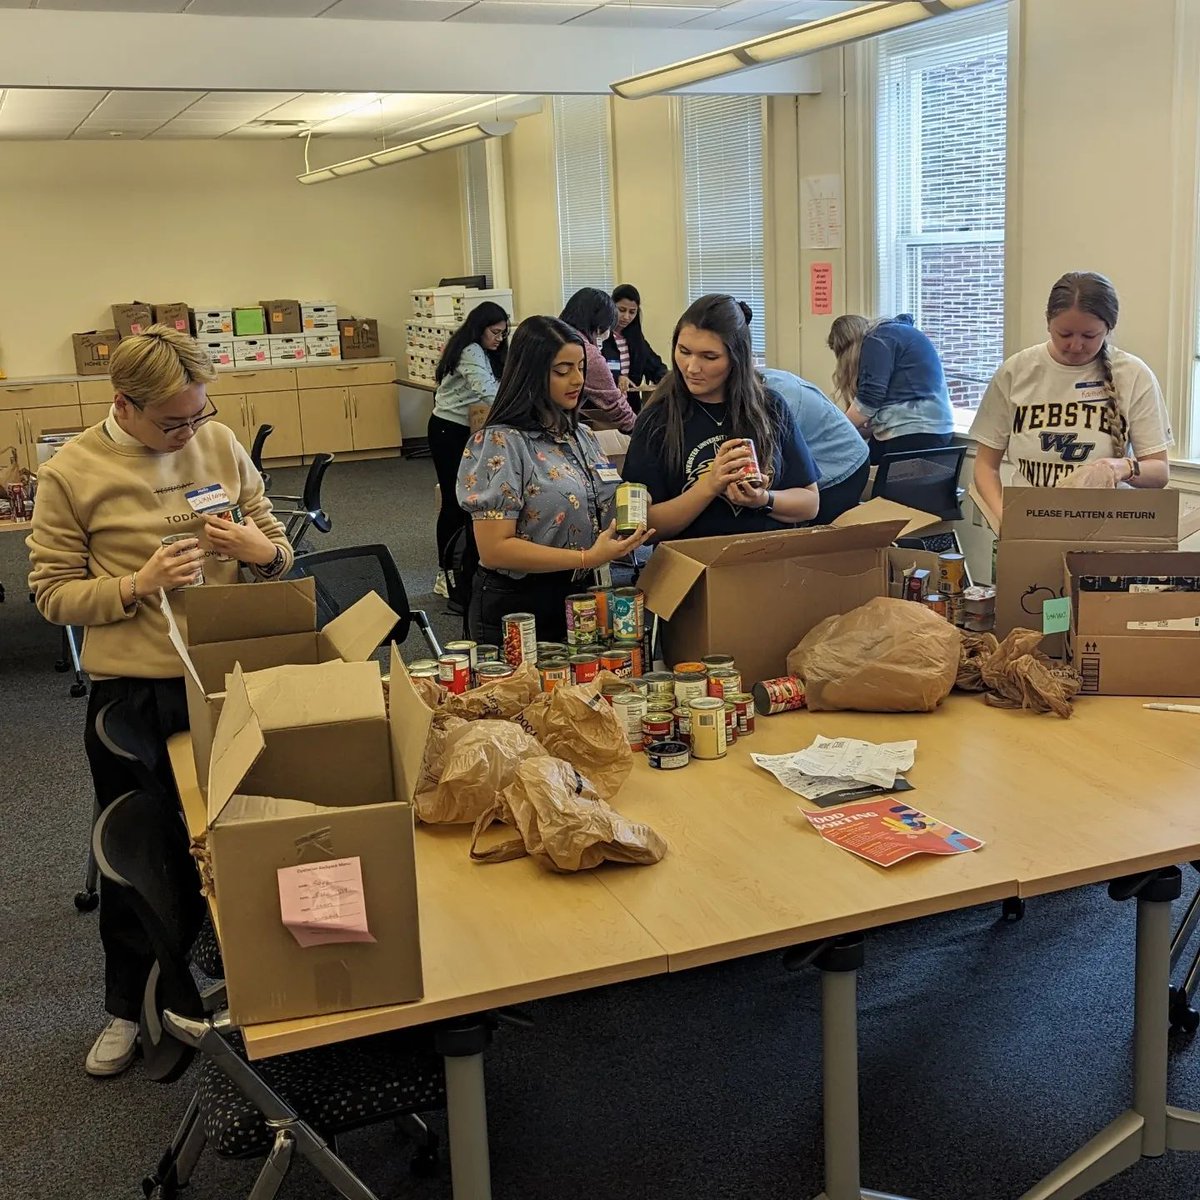 Congratulations to the Student Education Association for collecting 3,000 shelf-stable food items during their food drive! The Webster community is now coming together again to sort and prepare the food for the schools in need.